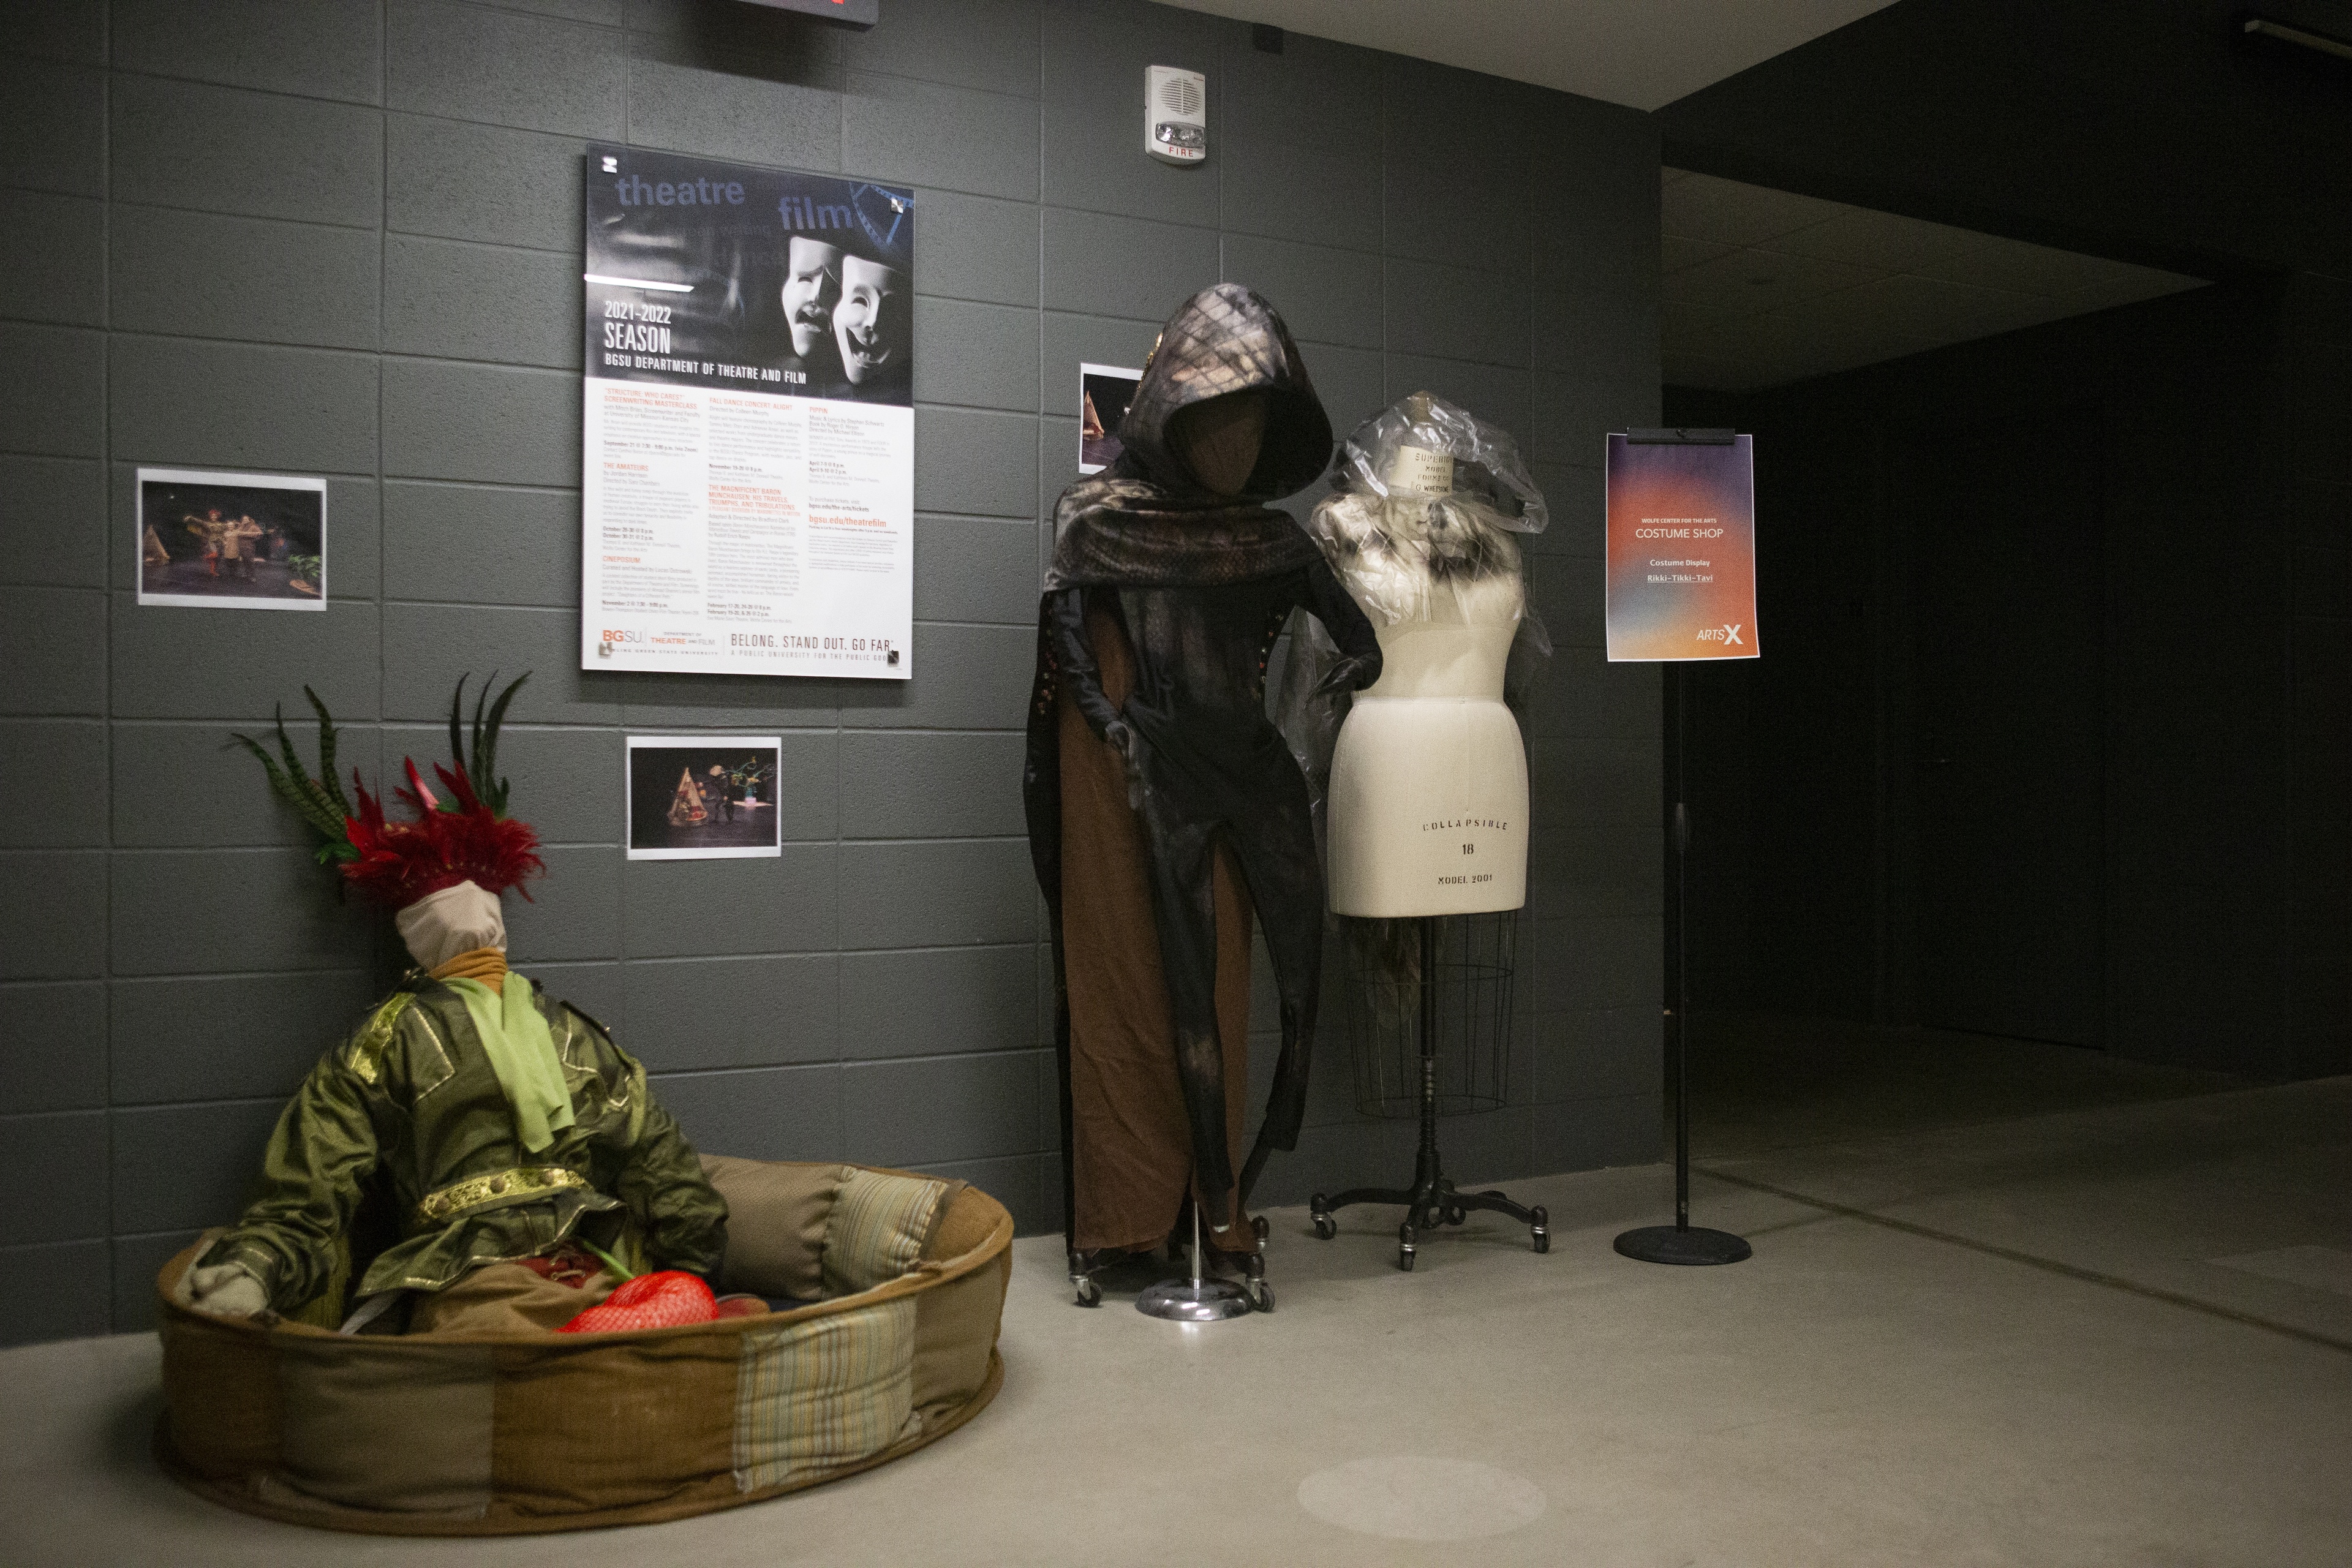 Costumes on display from the costume shop